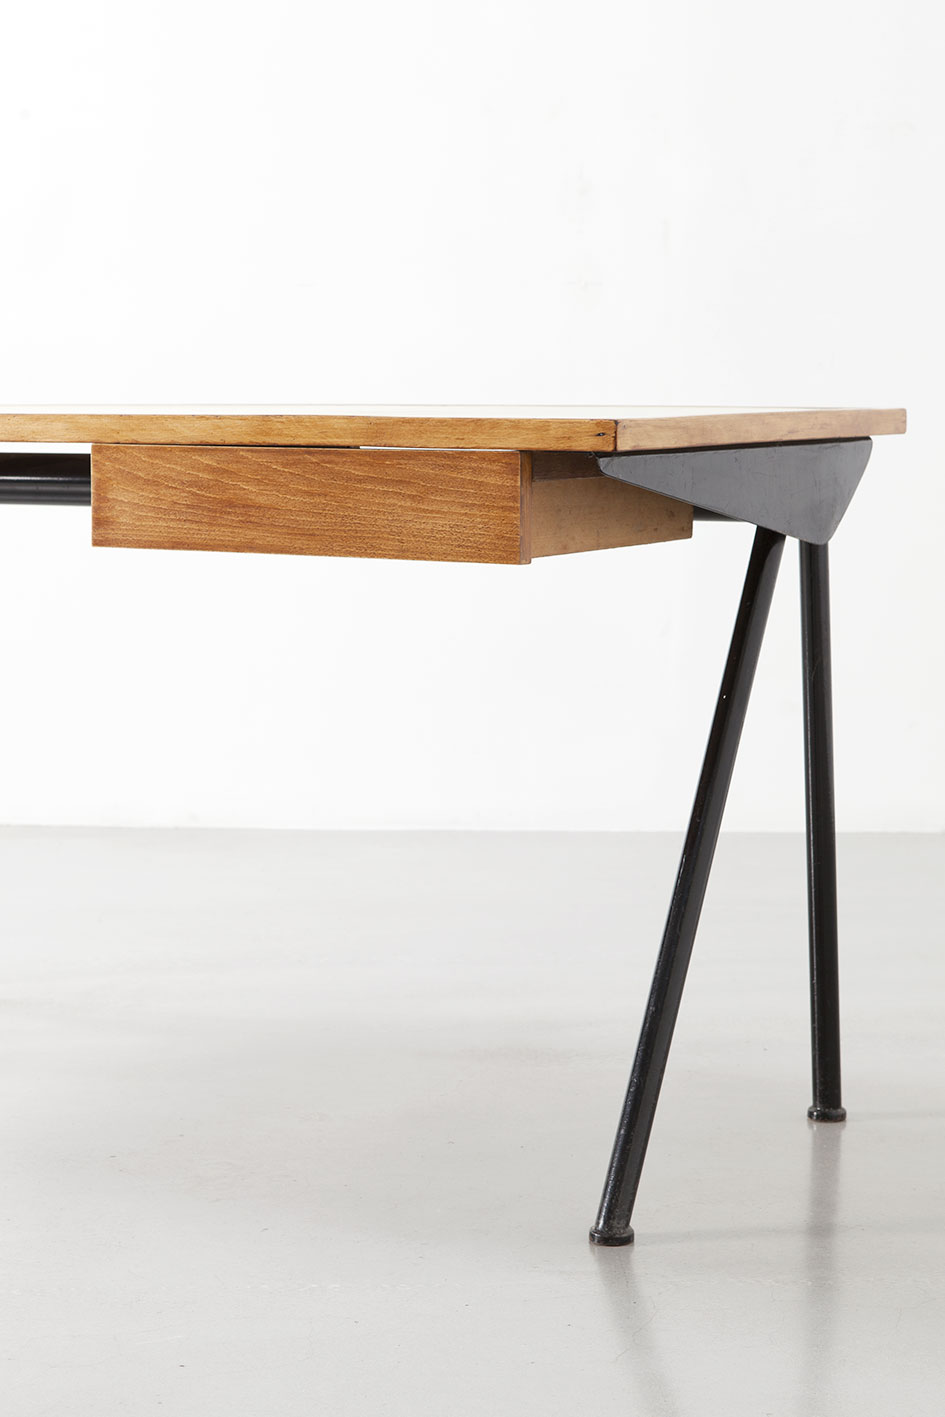 Desk with Compas base, variant with tube legs and desk top in laminated wood, 1955.